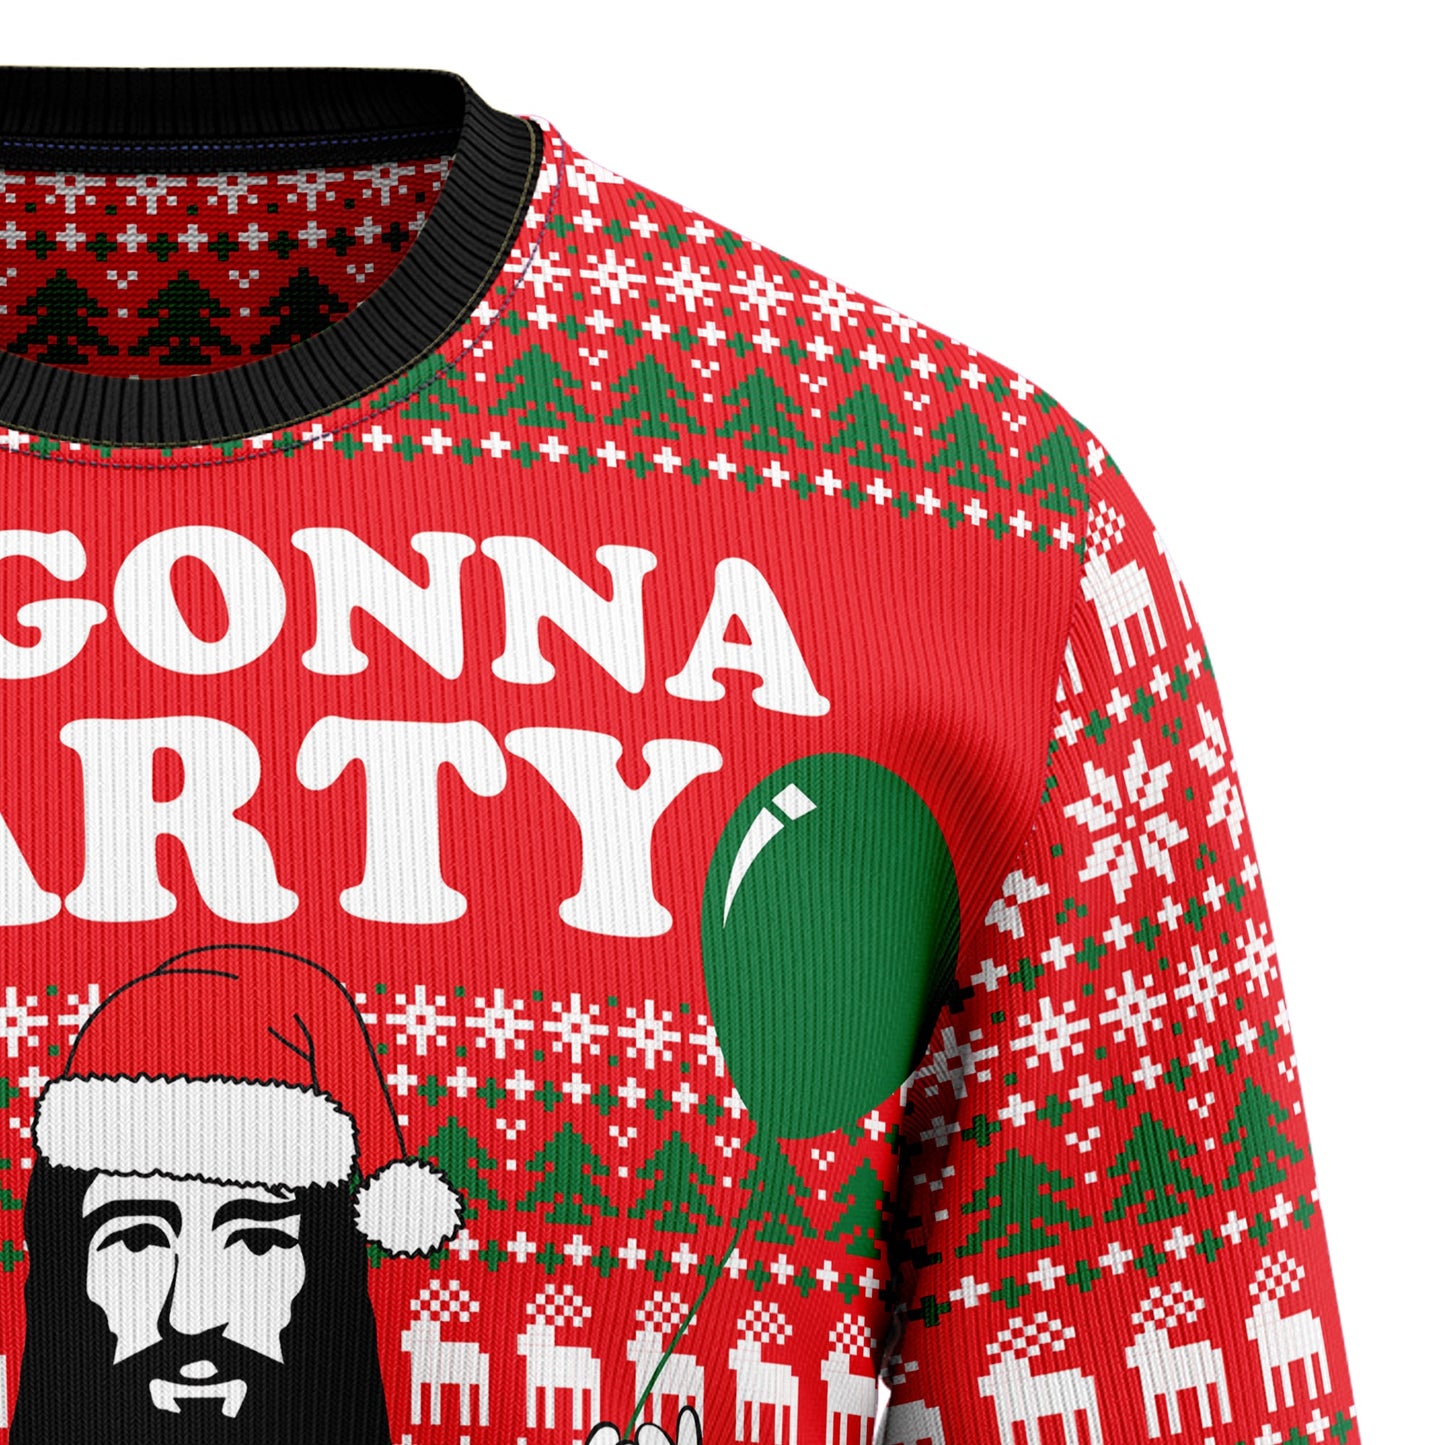 Christian Party Ugly Christmas Sweater - Xmas Gifts For Him Or Her - Christmas Gift For Friends - Best Gift For Christian